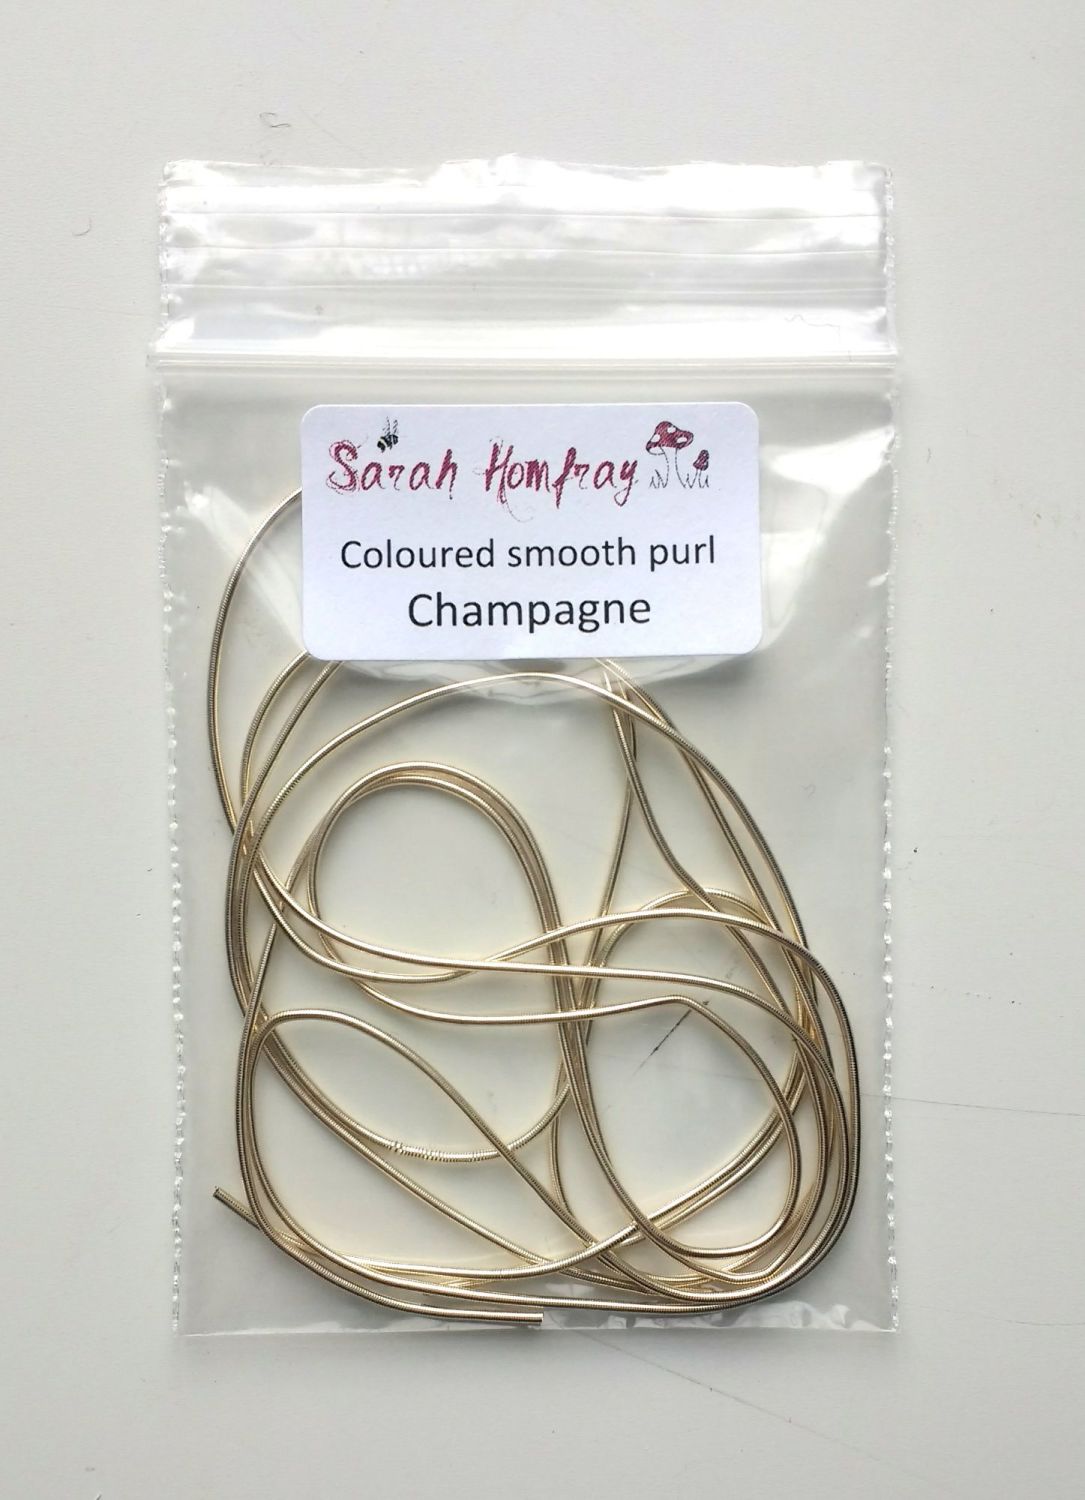 NEW! Coloured smooth purl no.6 - Champagne